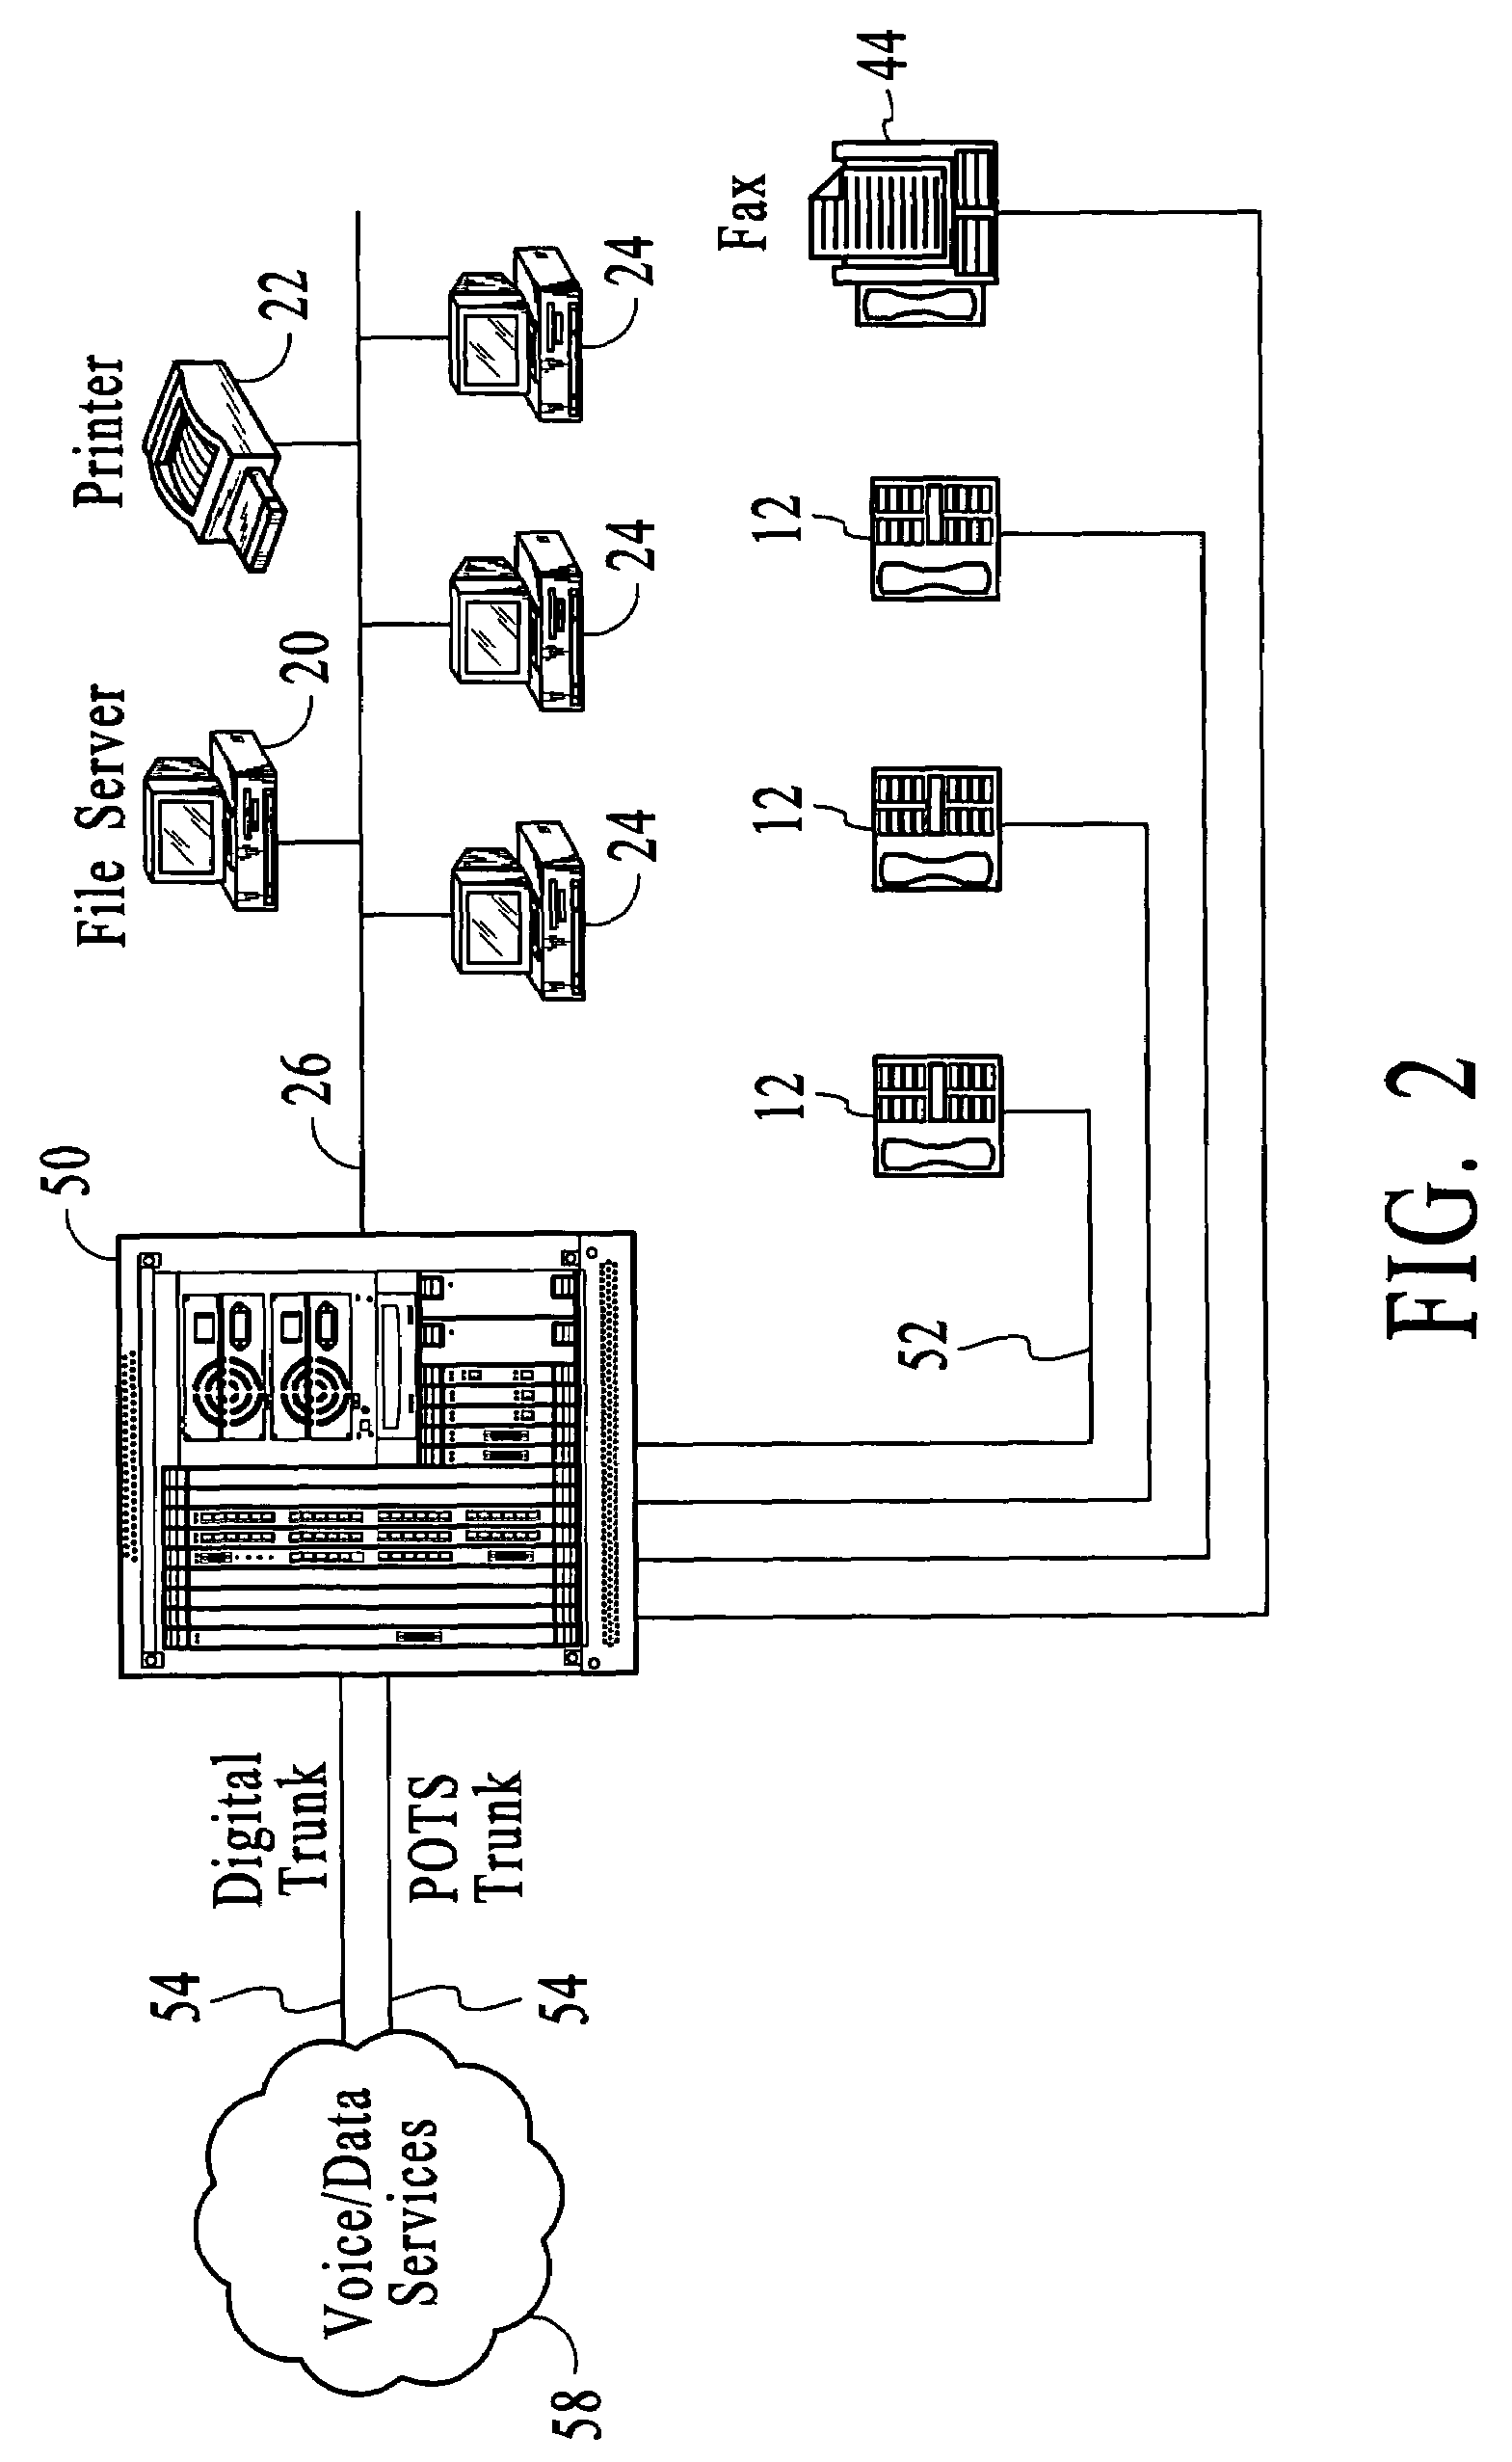 Systems and methods for voice and data communications including a network drop and insert interface for an external data routing resource